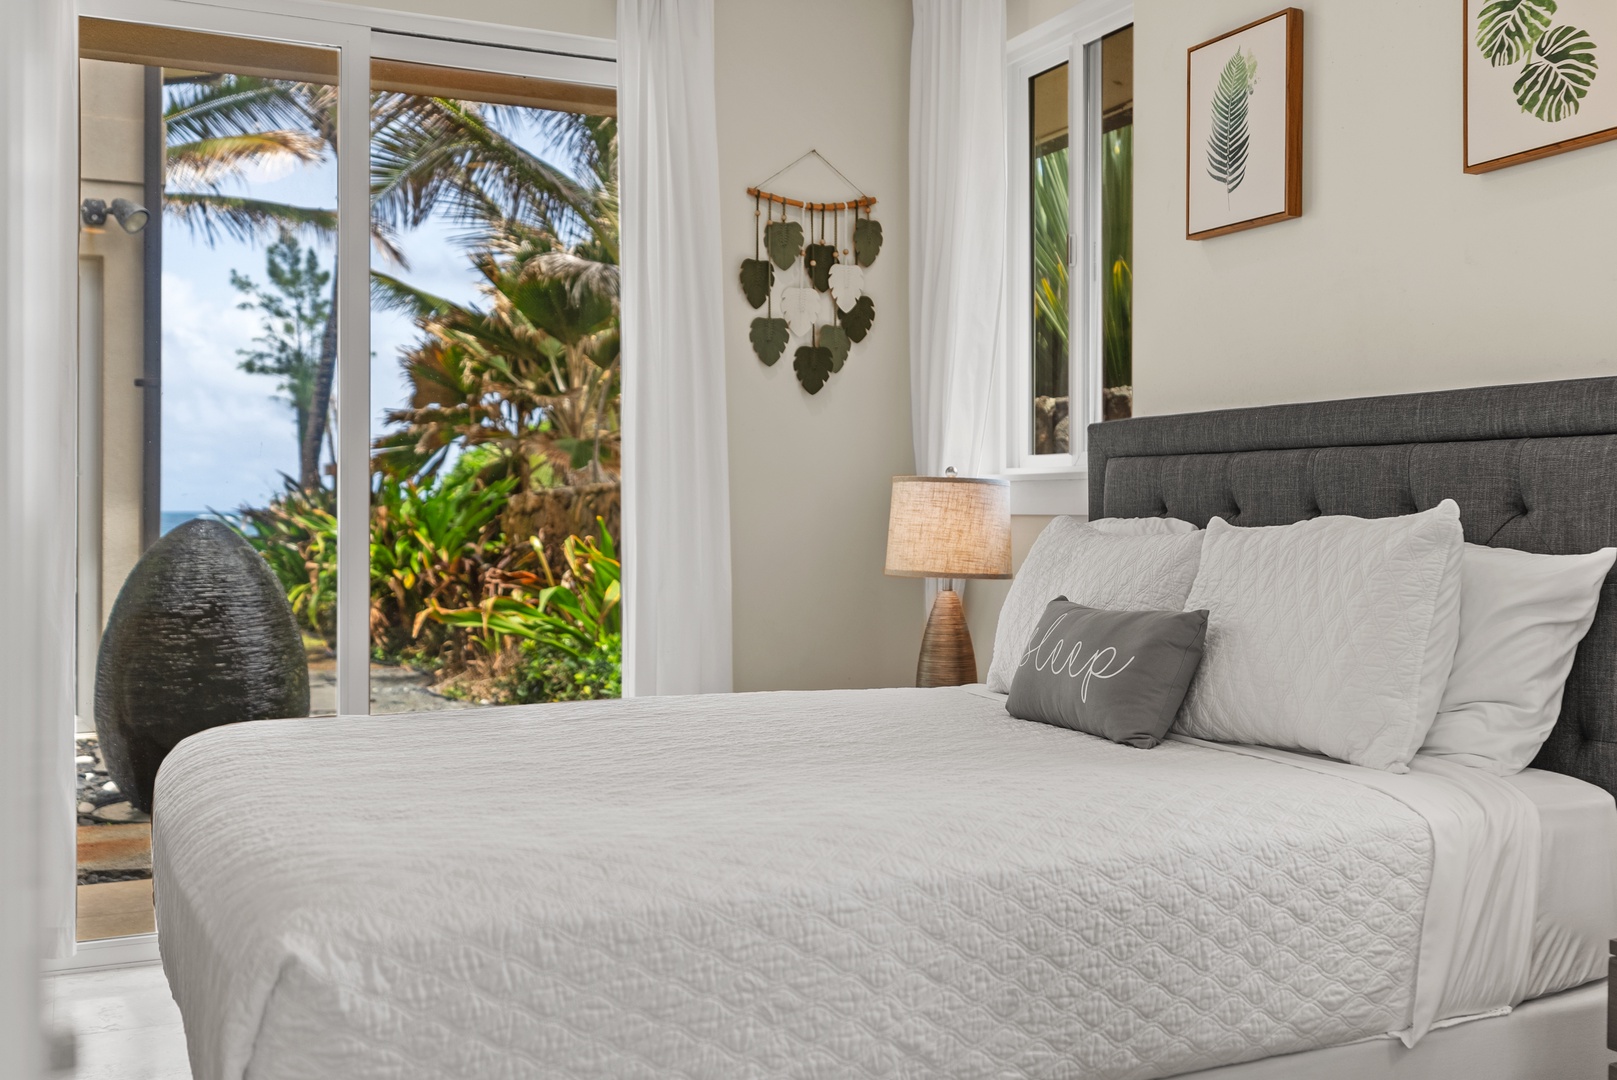 Laie Vacation Rentals, Laie Beachfront Estate - The lower-level bedroom with a queen bed and private lanai.